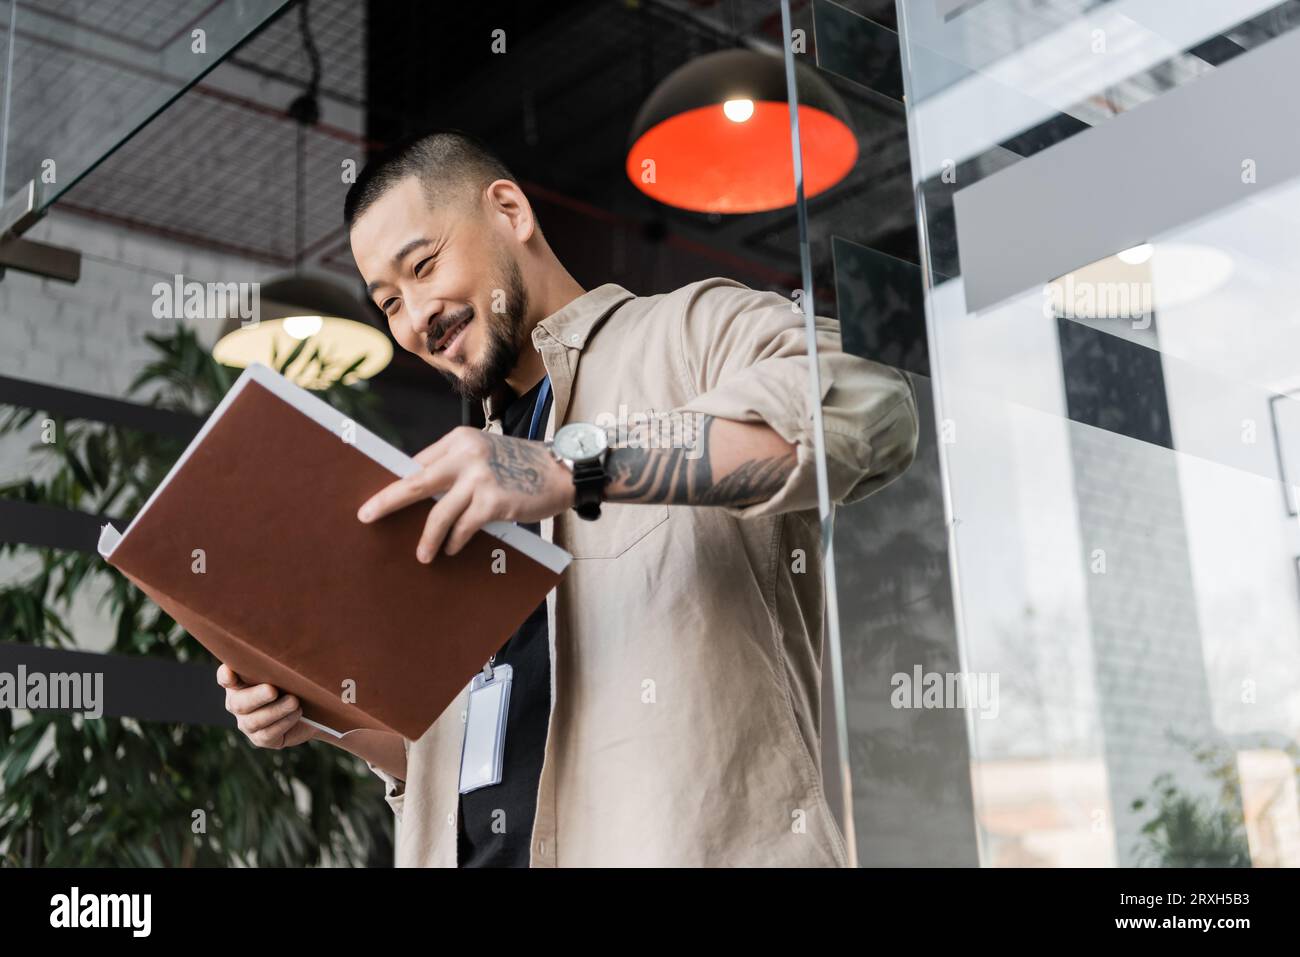 Man Working In Room Behind Glass Wall Whiteboard In Foreground High-Res  Stock Photo - Getty Images